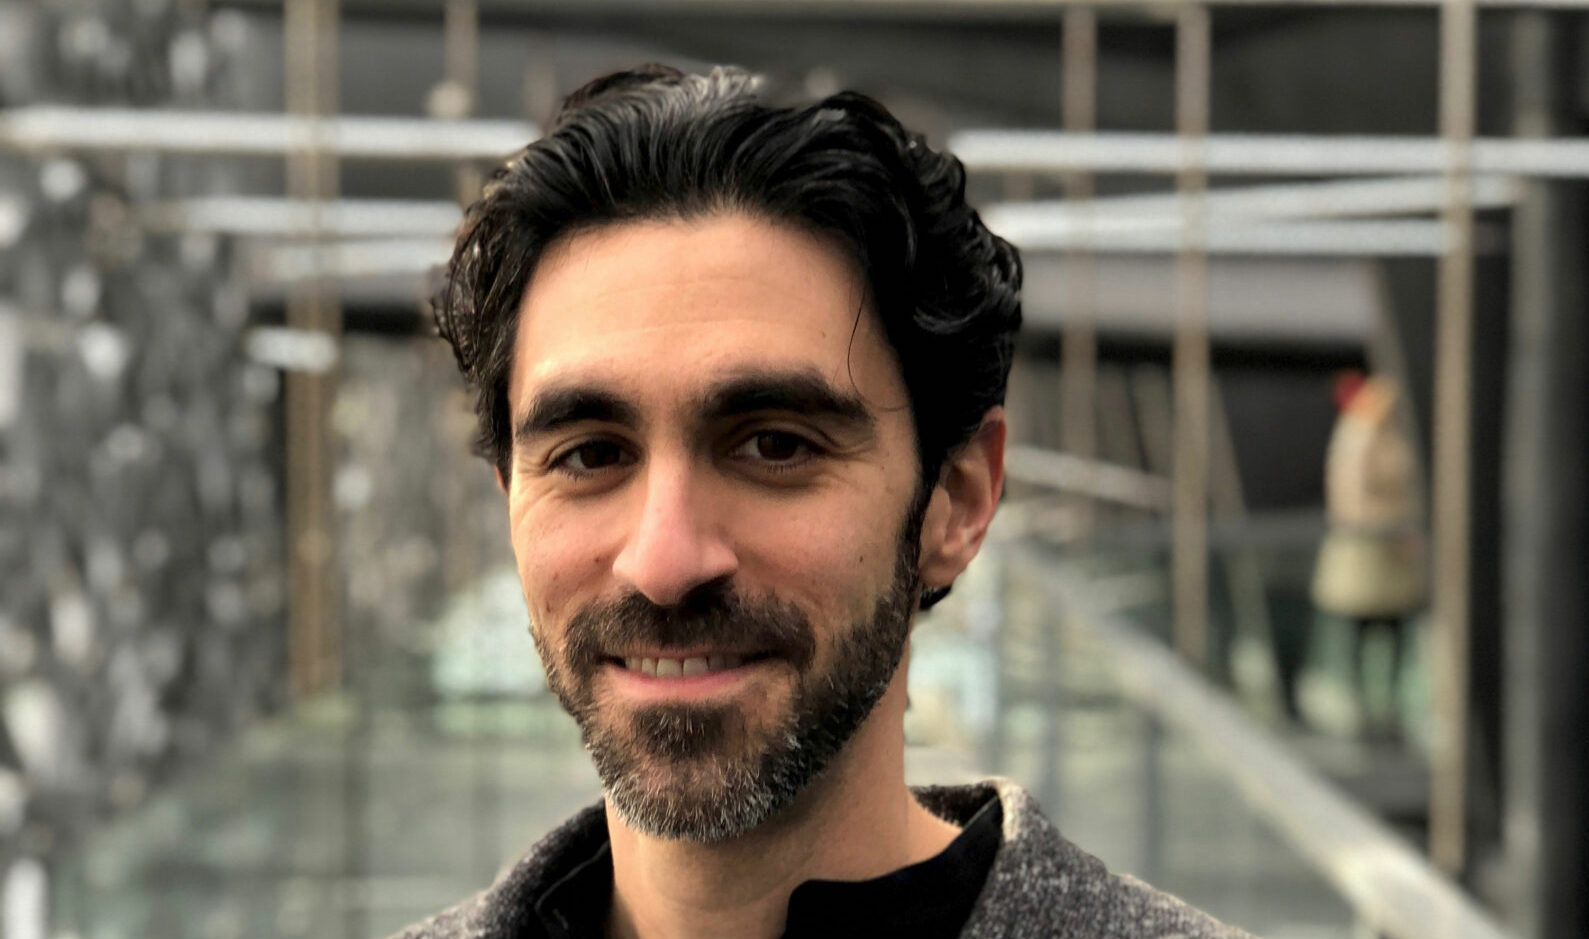 Ziad Obermeyer is an affiliate faculty member of the Center for Healthcare Marketplace Innovation and an associate professor of UC Berkeley's School of Public Health.